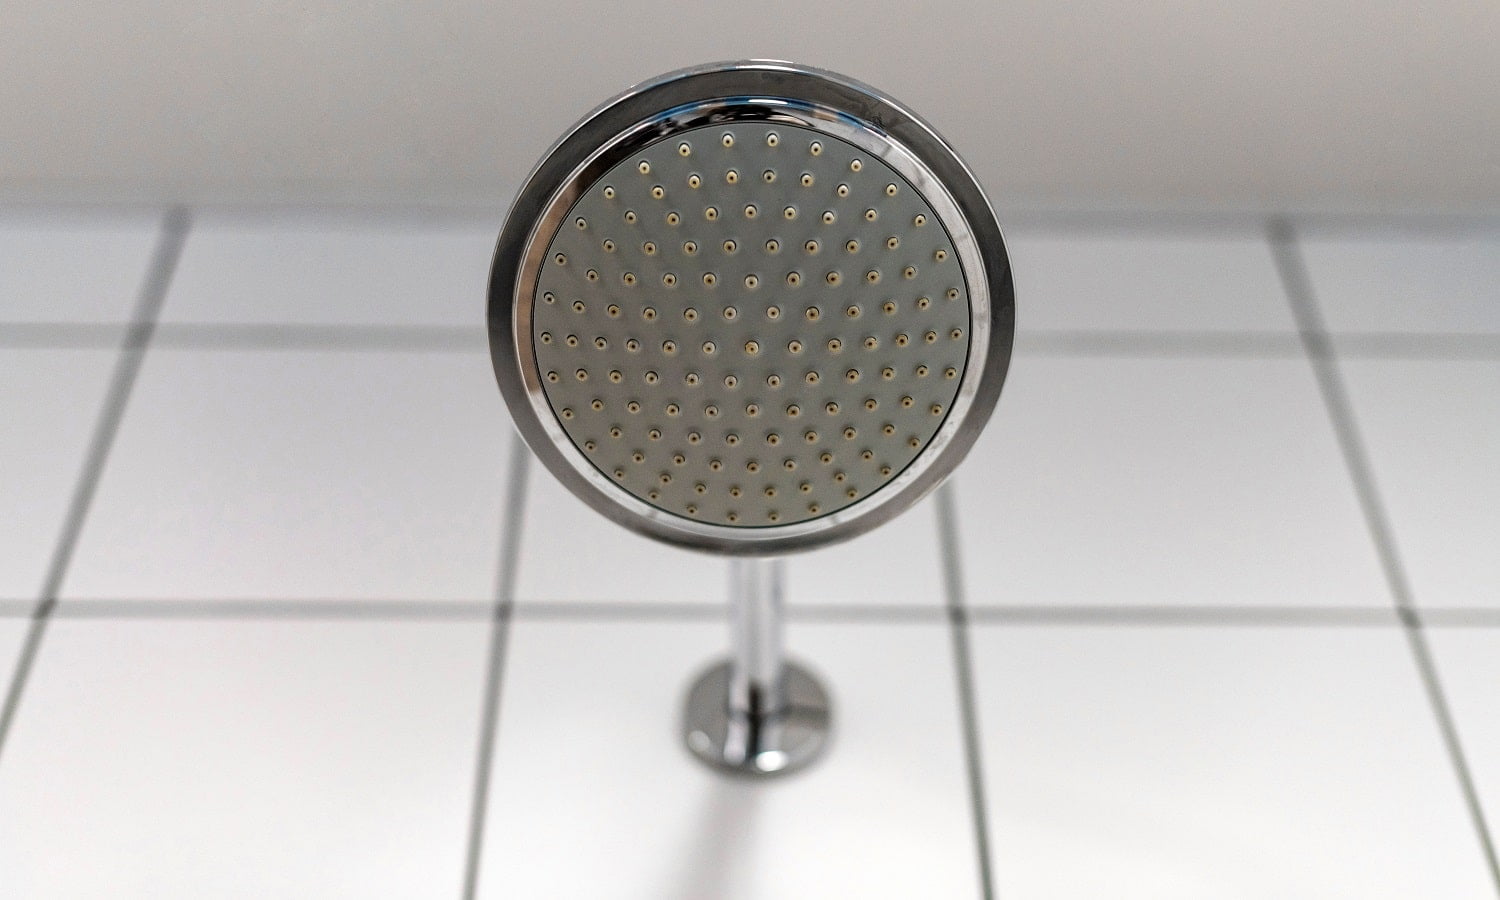 Shower head. Water supply is turned off